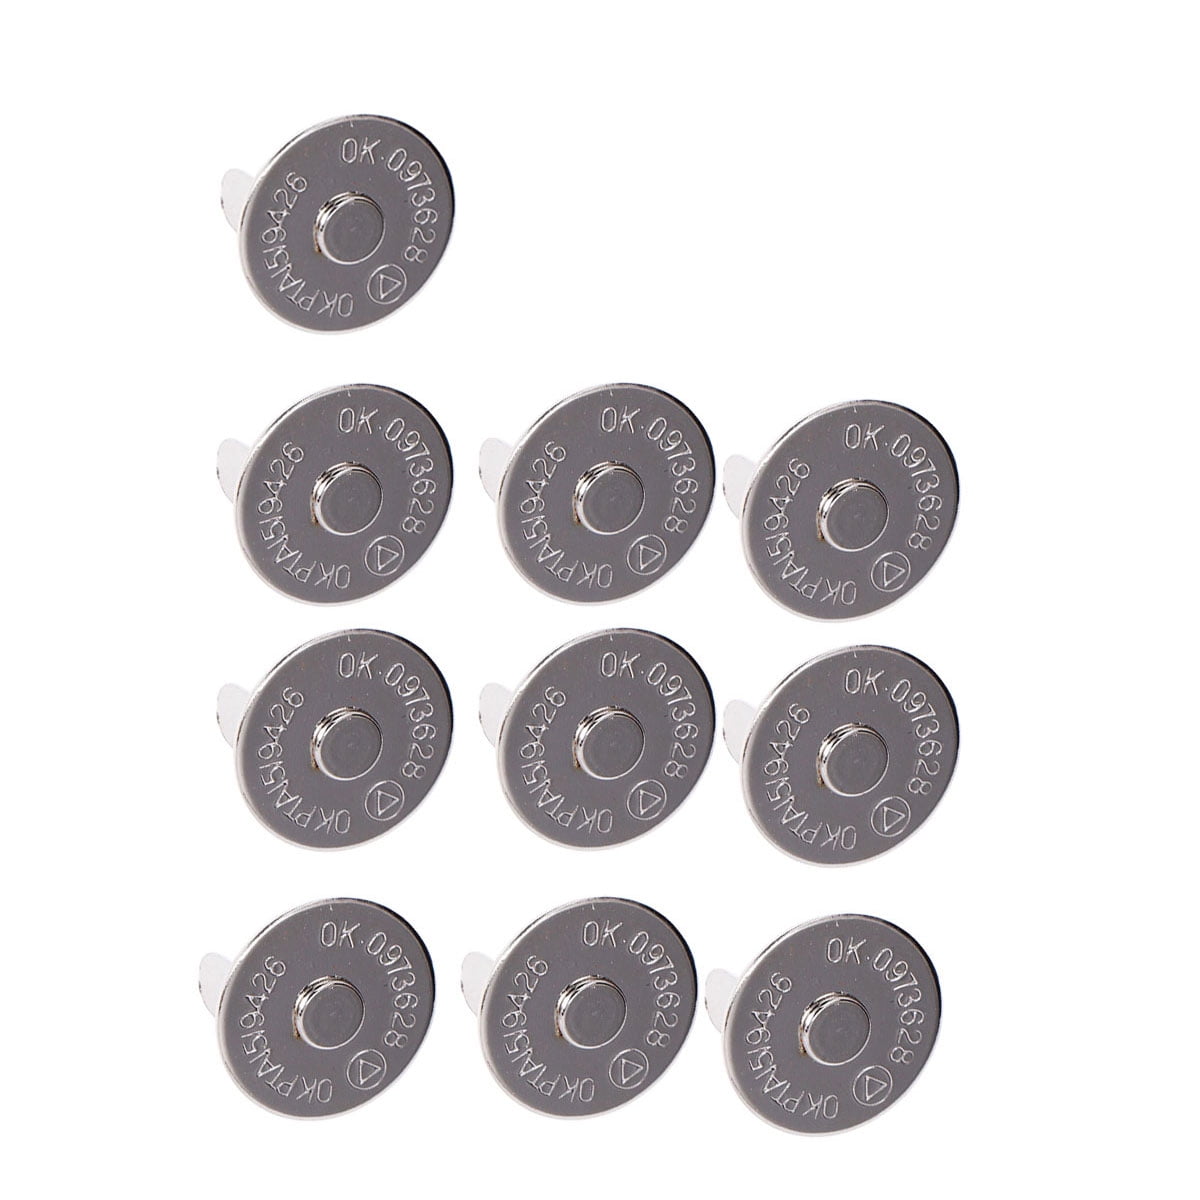 Magnetic Snap Set, Invisible, Sew-In - 14MM (5/8) - Nickel, Set